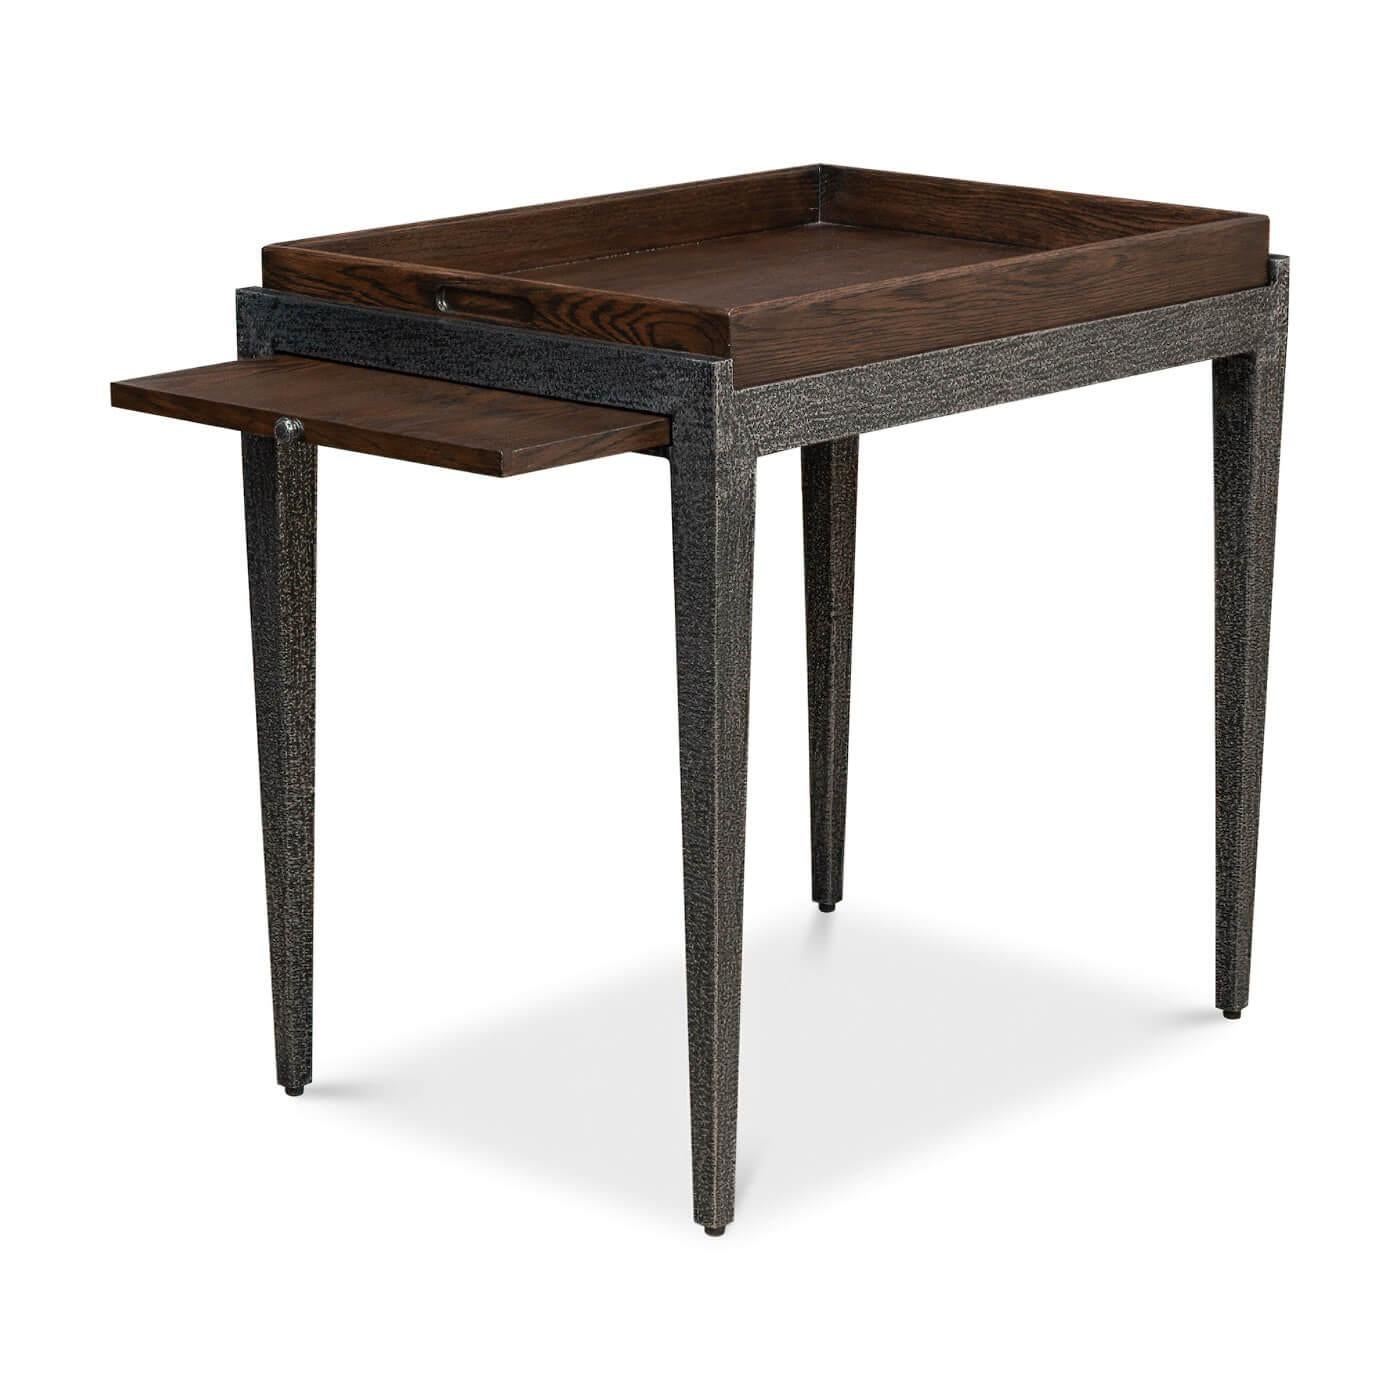 A modern iron and oak end table with a straight-lined contemporary design. It is crafted from walnut and oak veneers and given our burnt brown oak finish. With a large slide-out candle slide.

Dimensions
20 in. W x 28 in. D x 27 in. H.
 